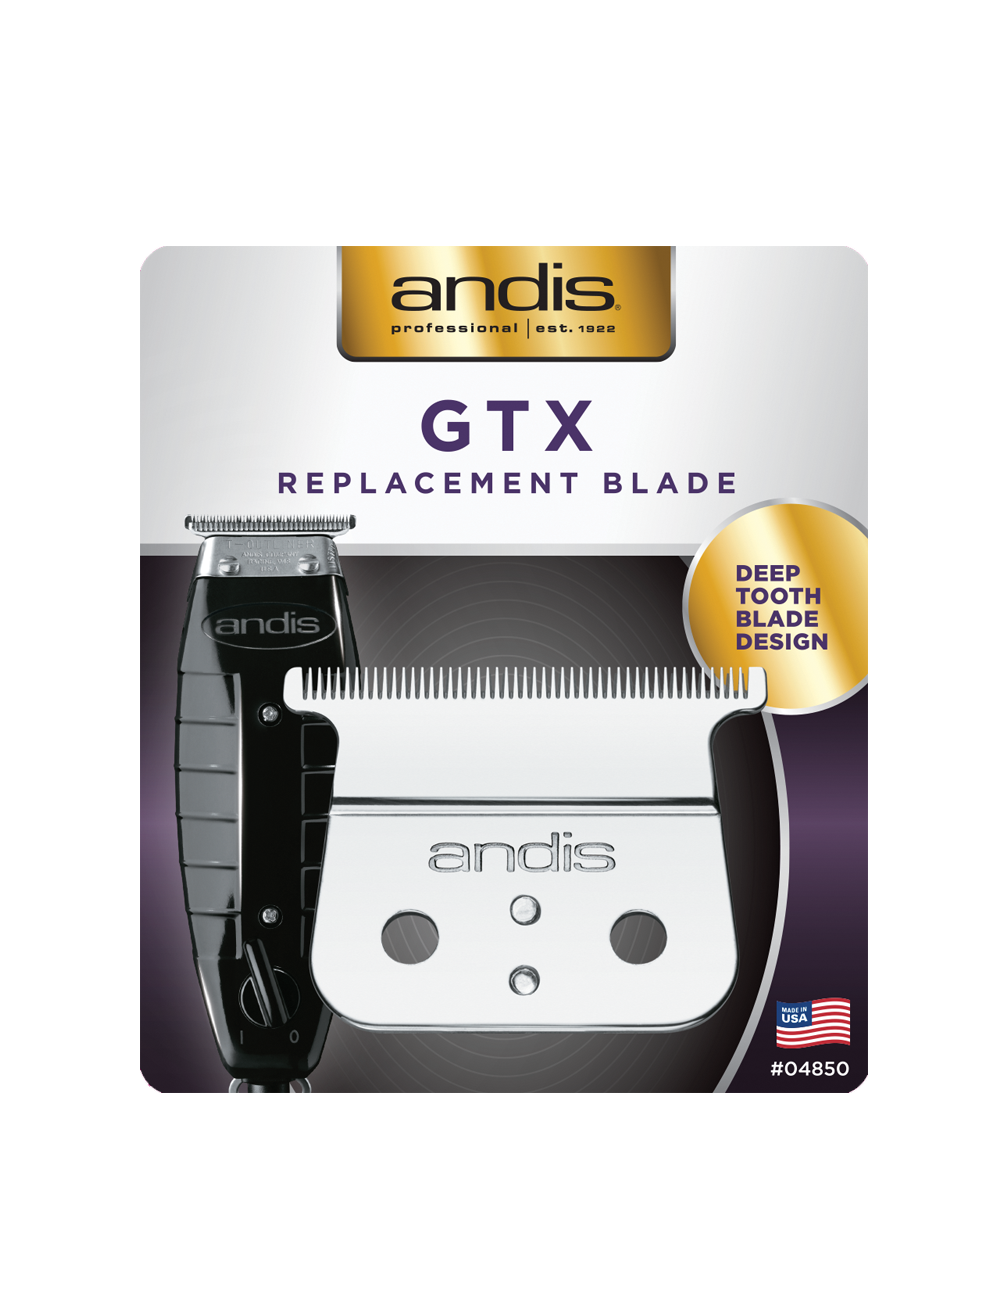 ANDIS GTX DEEP TOOTH REPLACEMENT BLADE